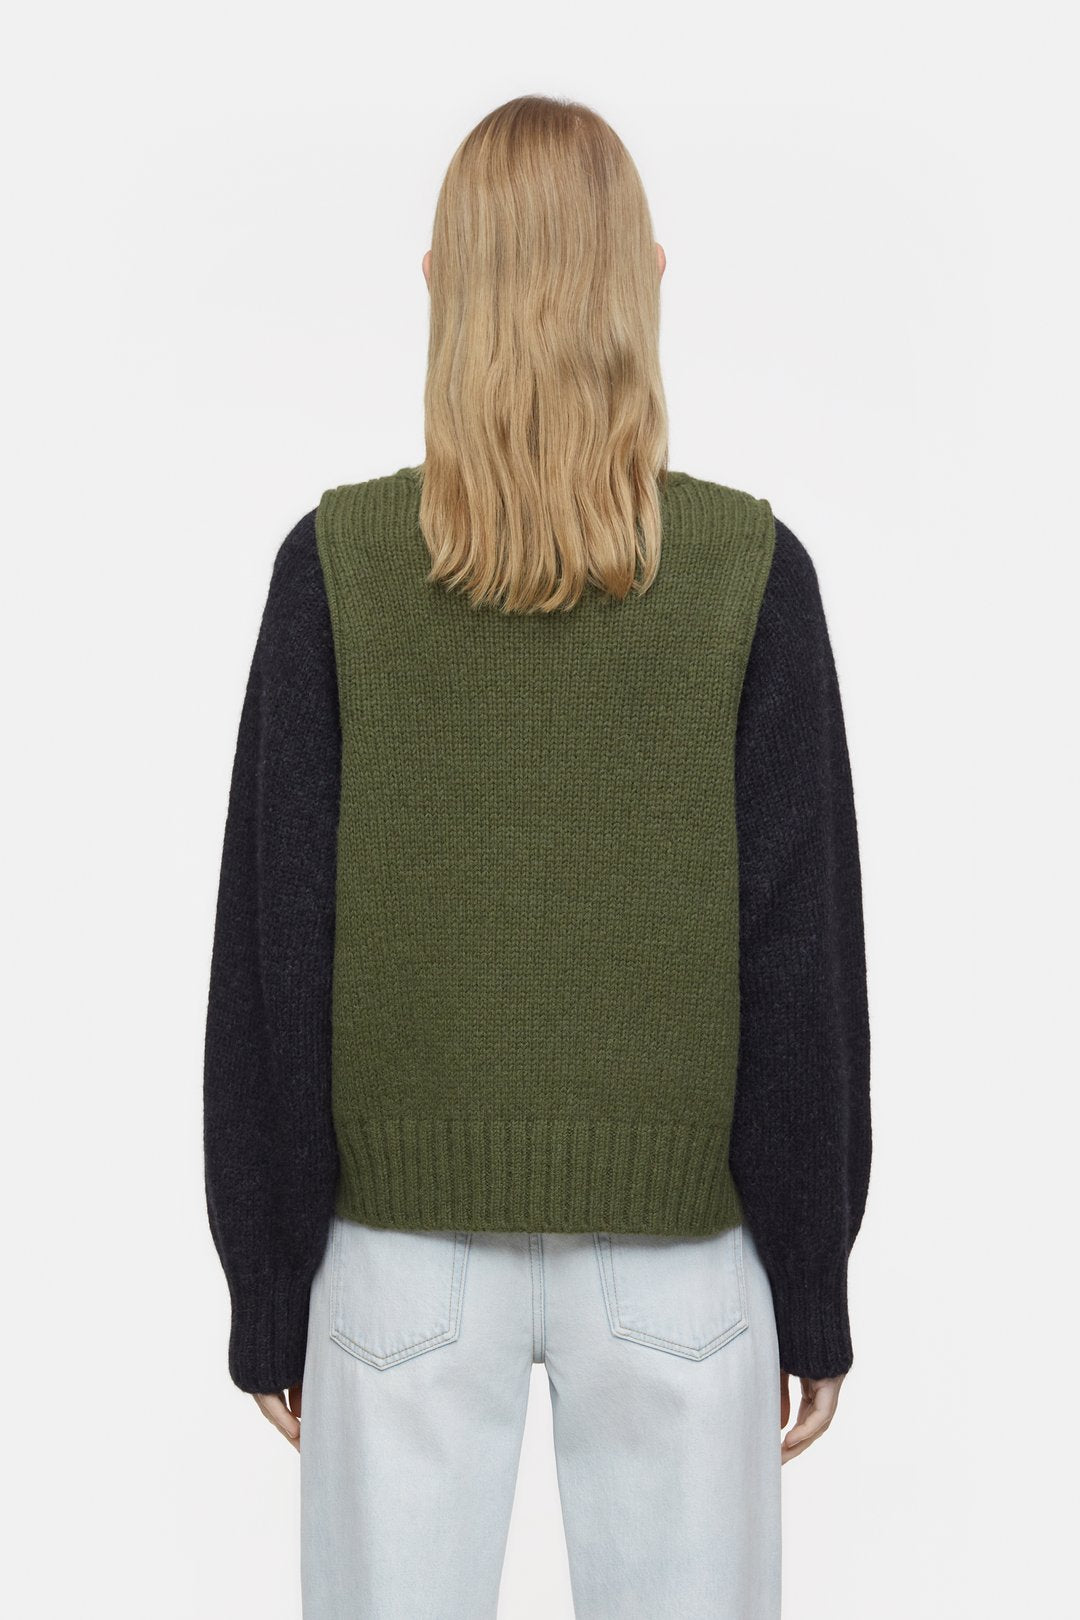 CLOSED WOMENS CREW NECK - INDUSTRIAL GREEN